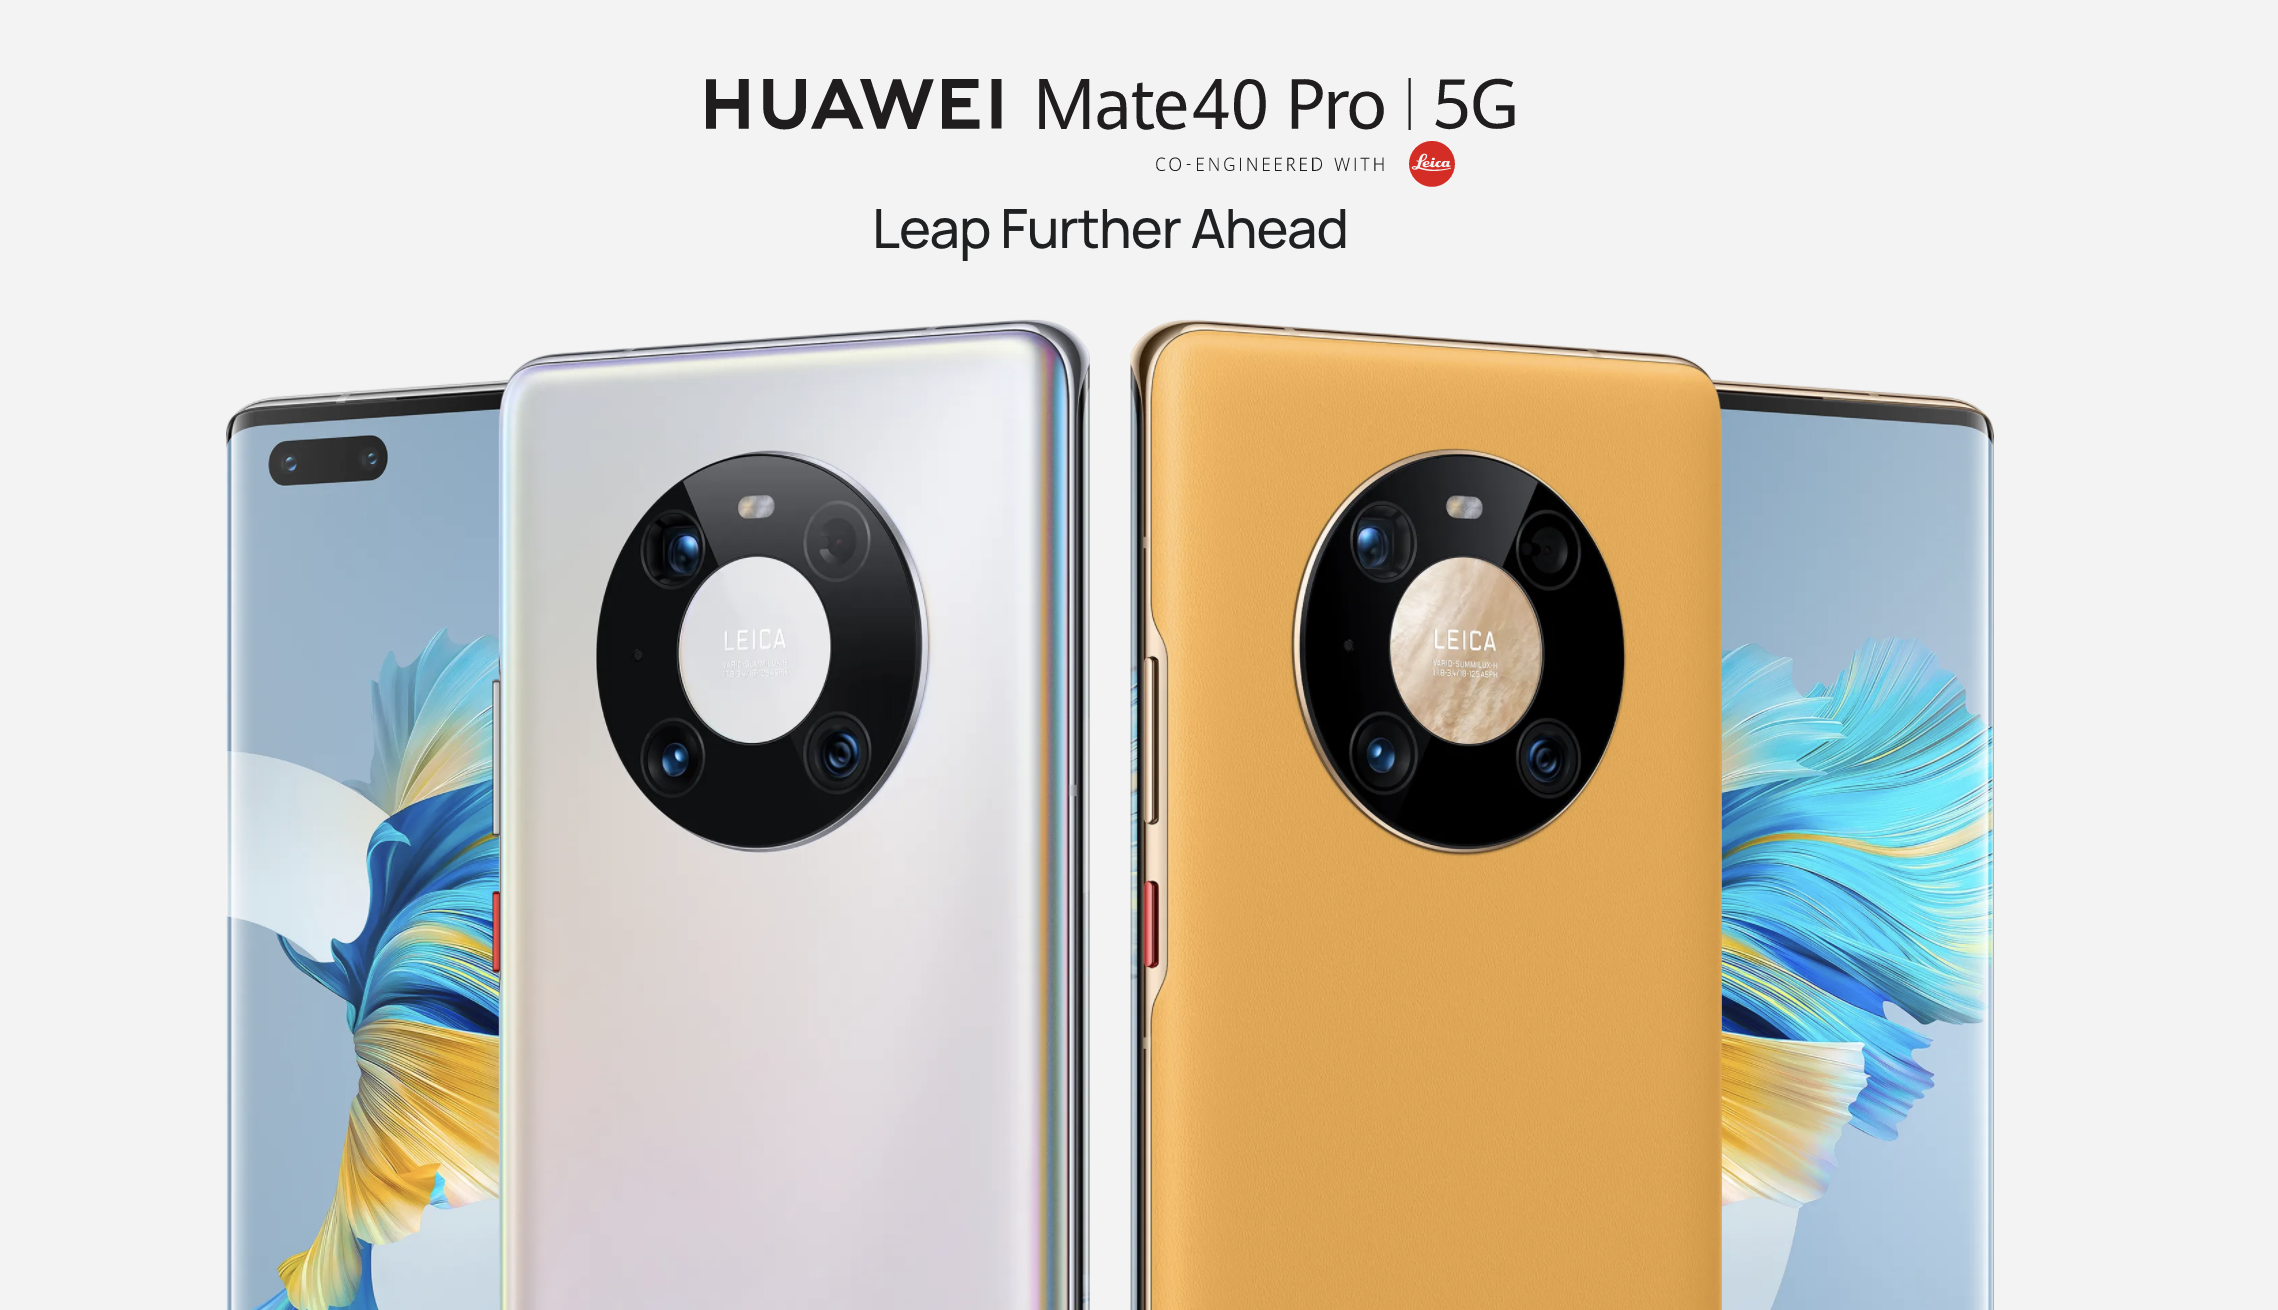 Huawei’s new Kirin-powered Mate 40 line receives warm welcome in China